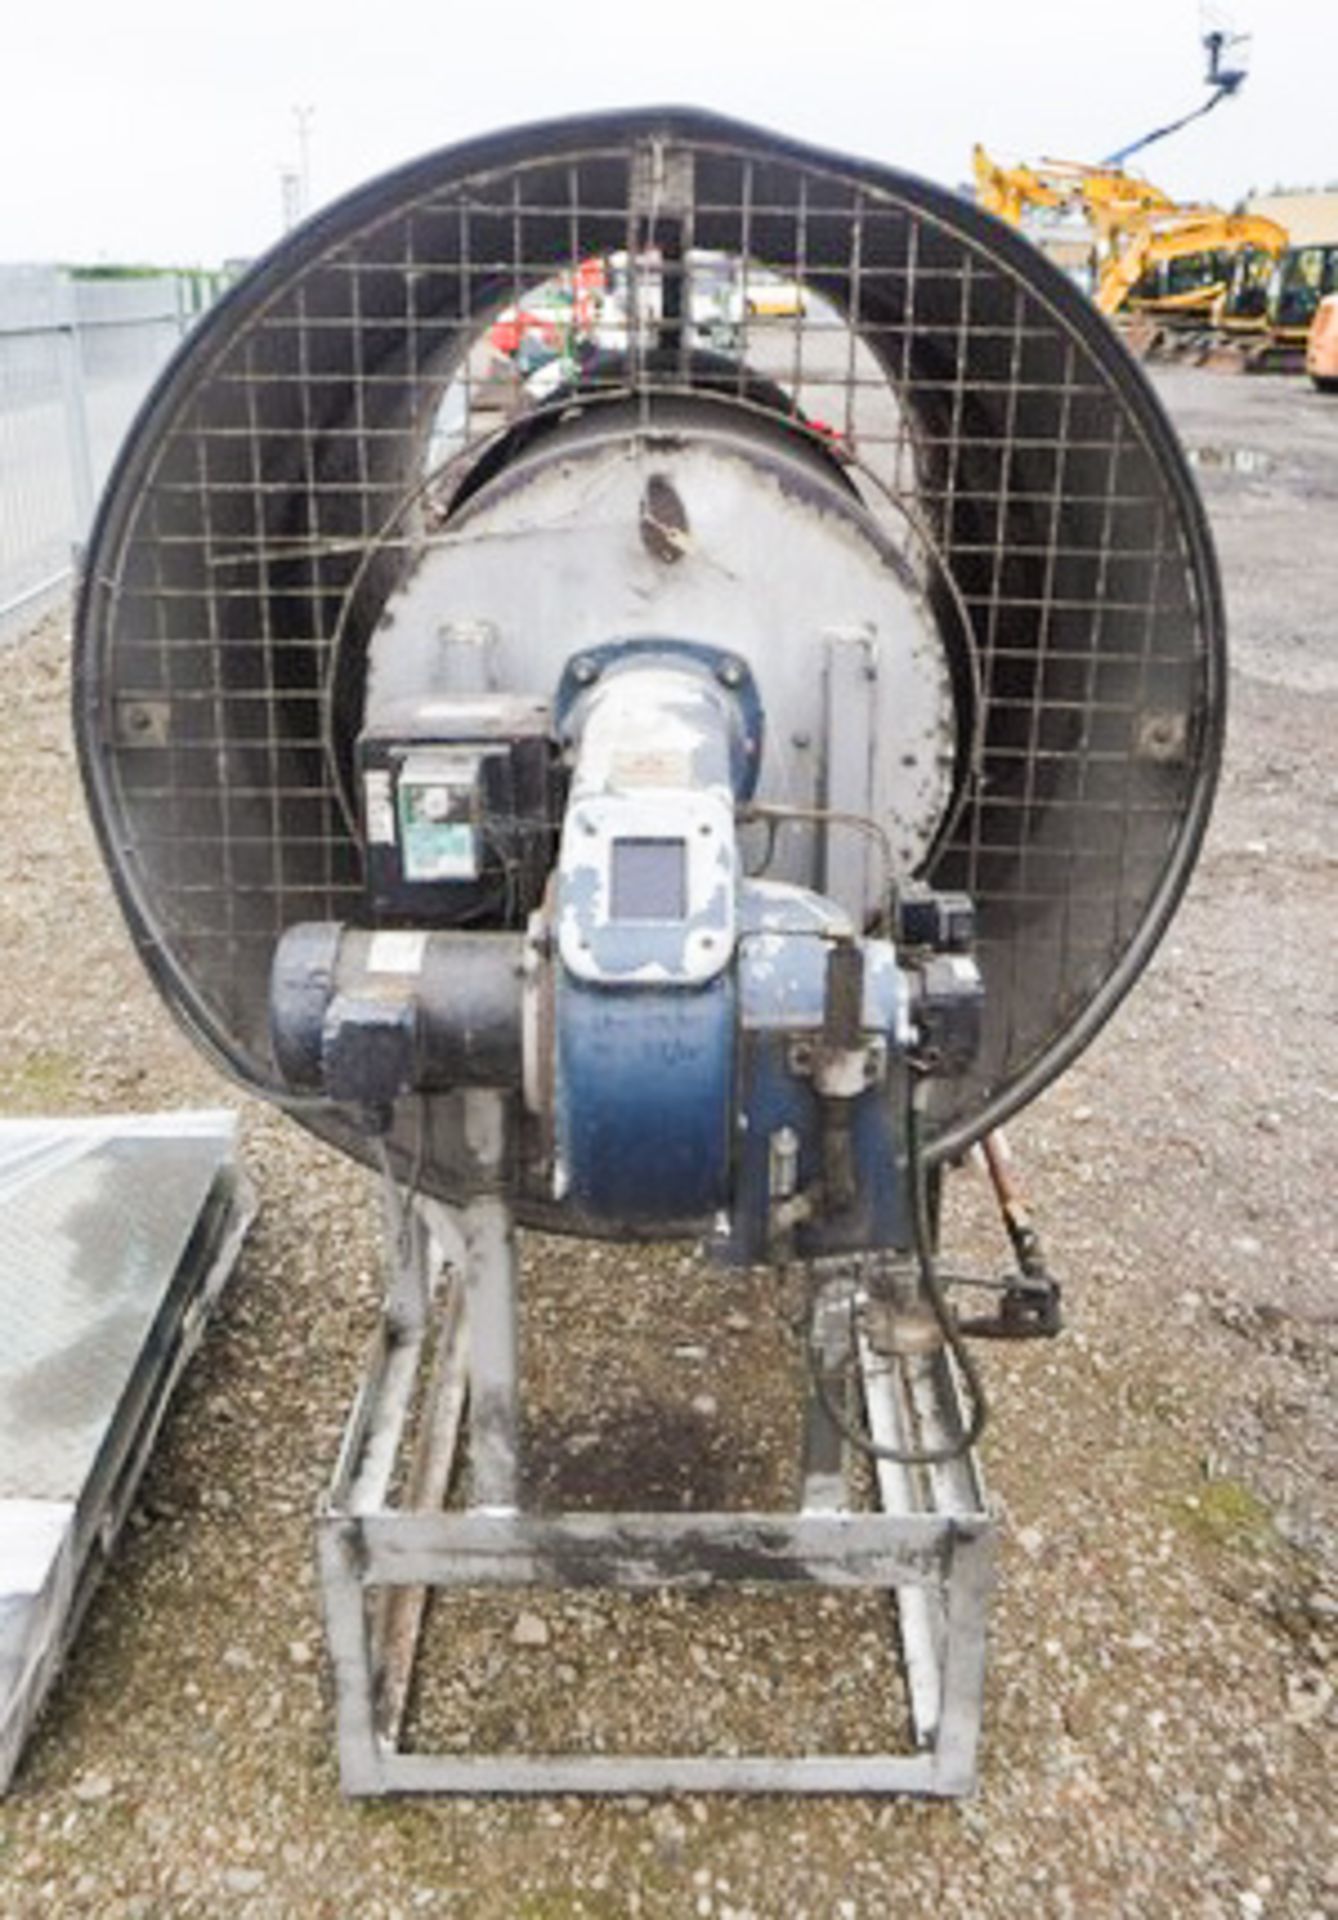 1 DIESEL BURNER FOR TRAY DRIER, NUWAY NOL 20-23, SUITABLE FOR 50HP CENTRIFUGAL FAN UNIT - Image 2 of 2